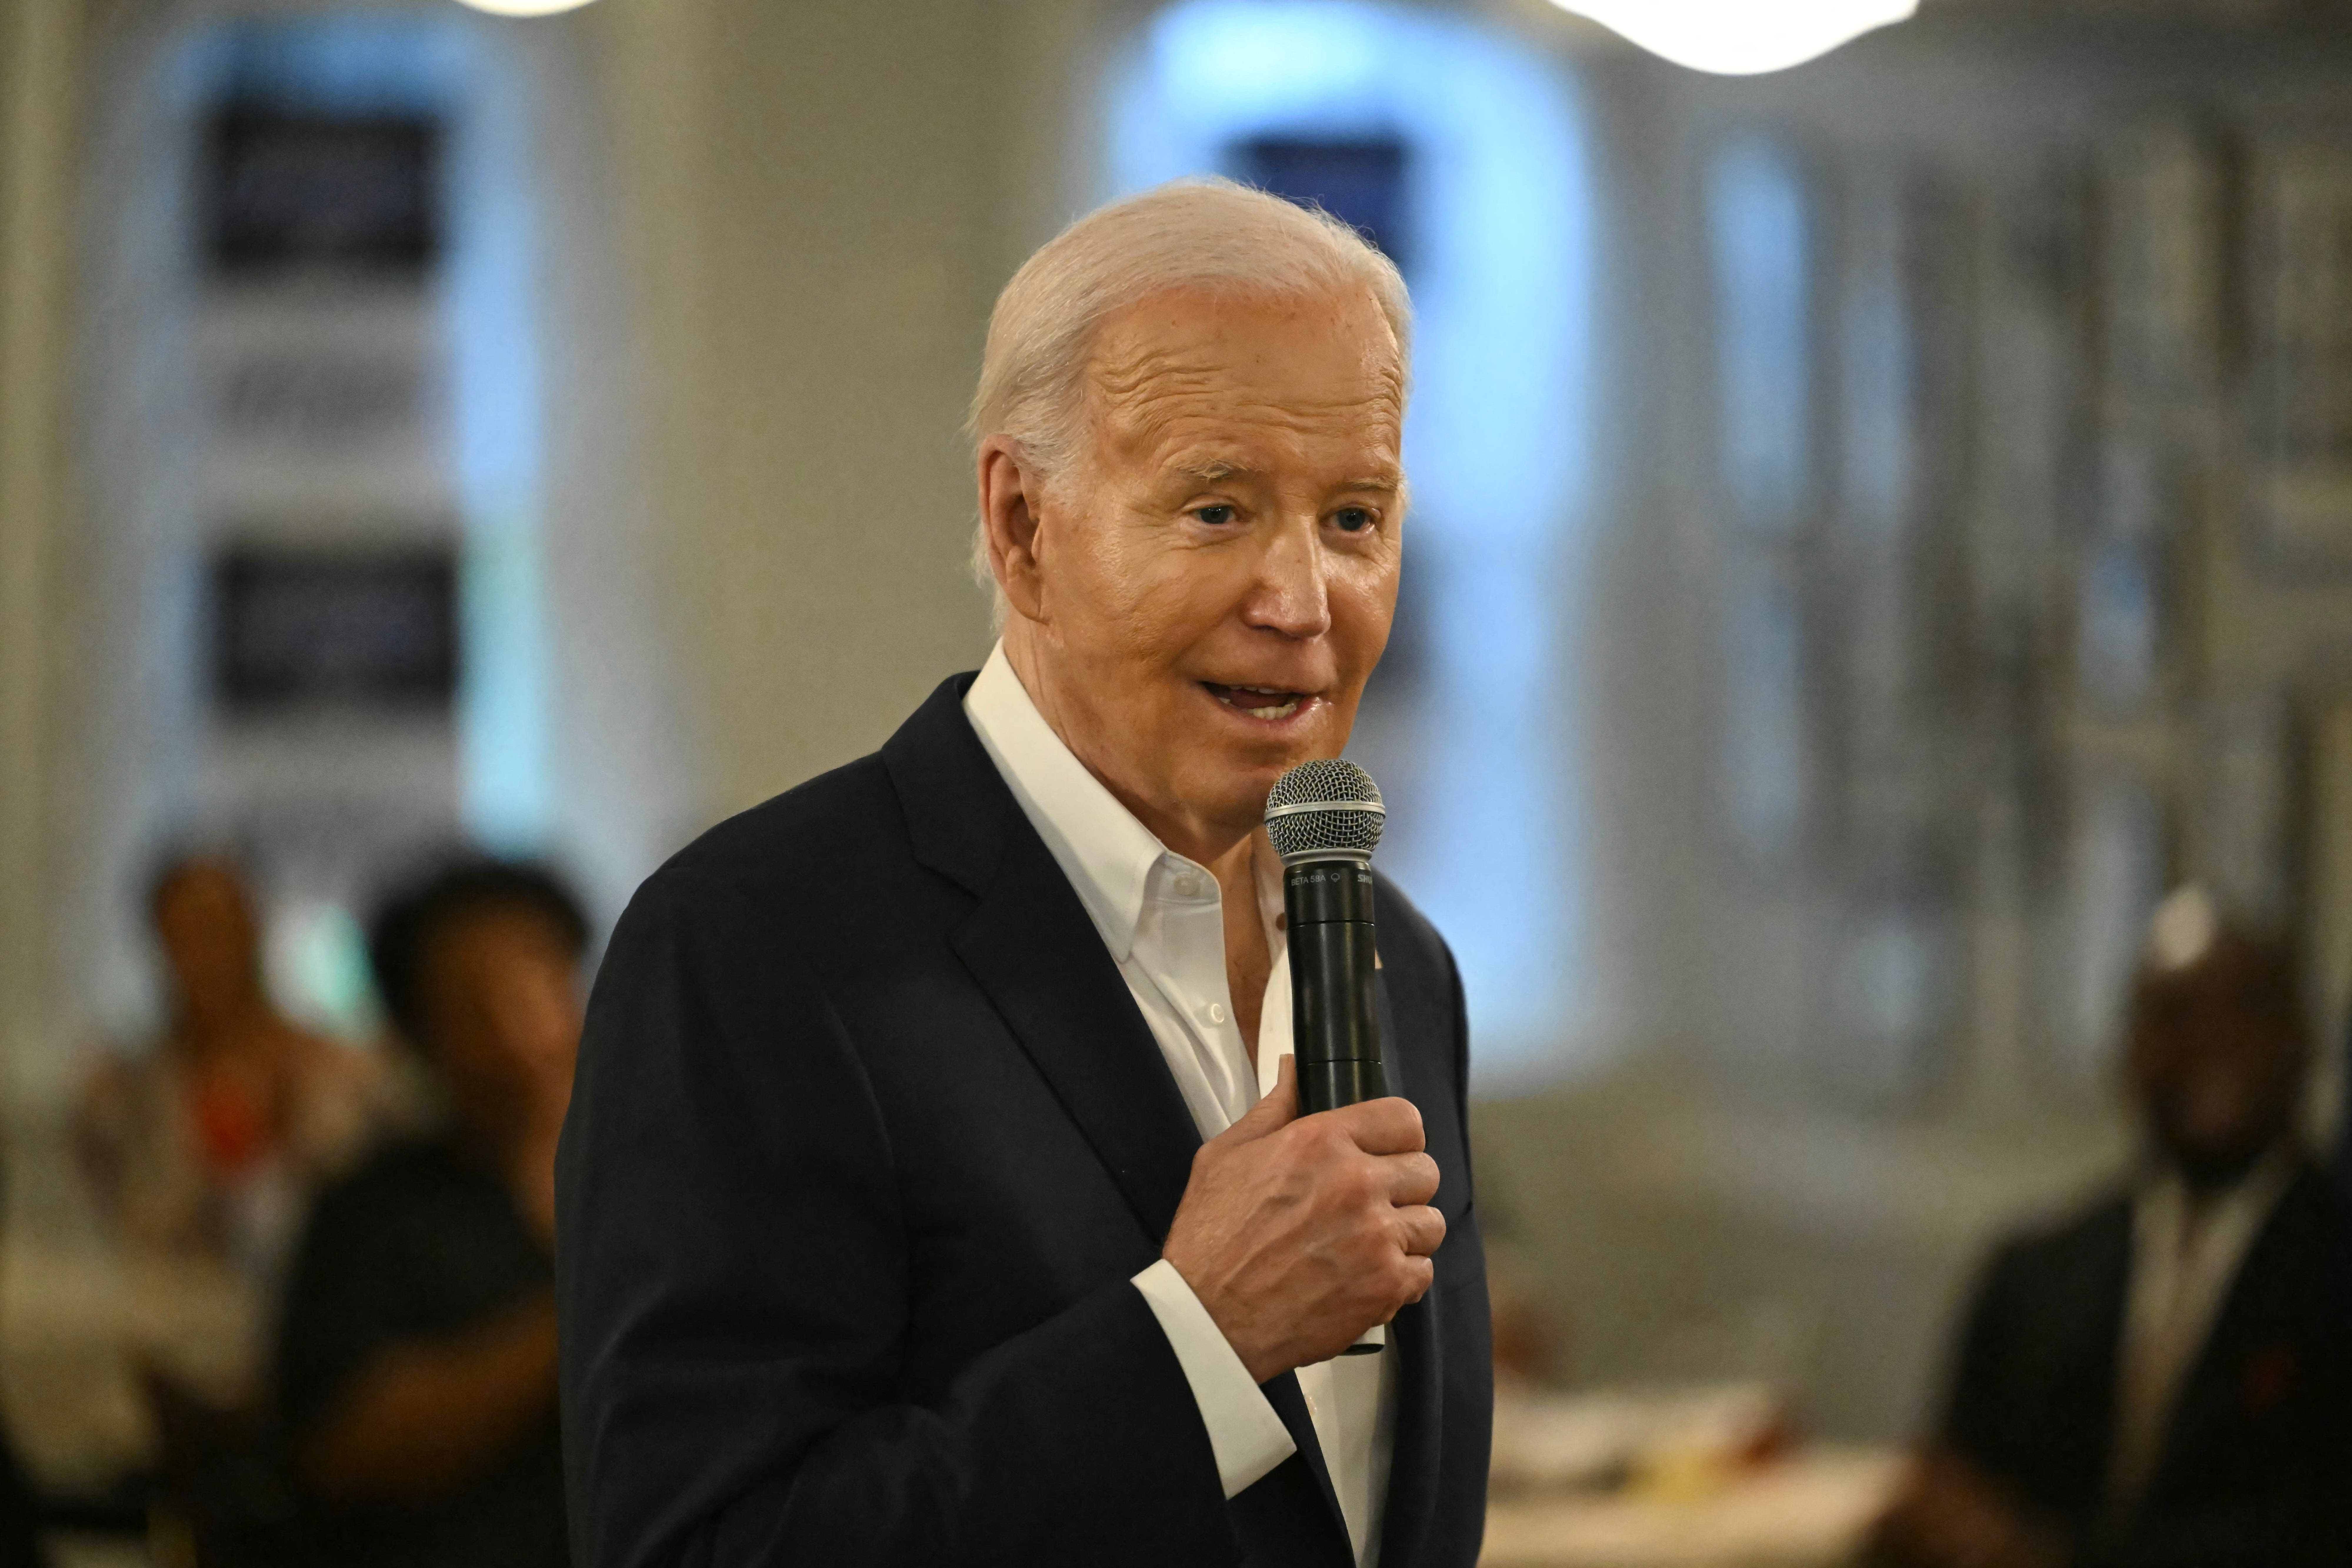 'A loser:' With new bag of taunts, Biden tries to get under Trump's skin